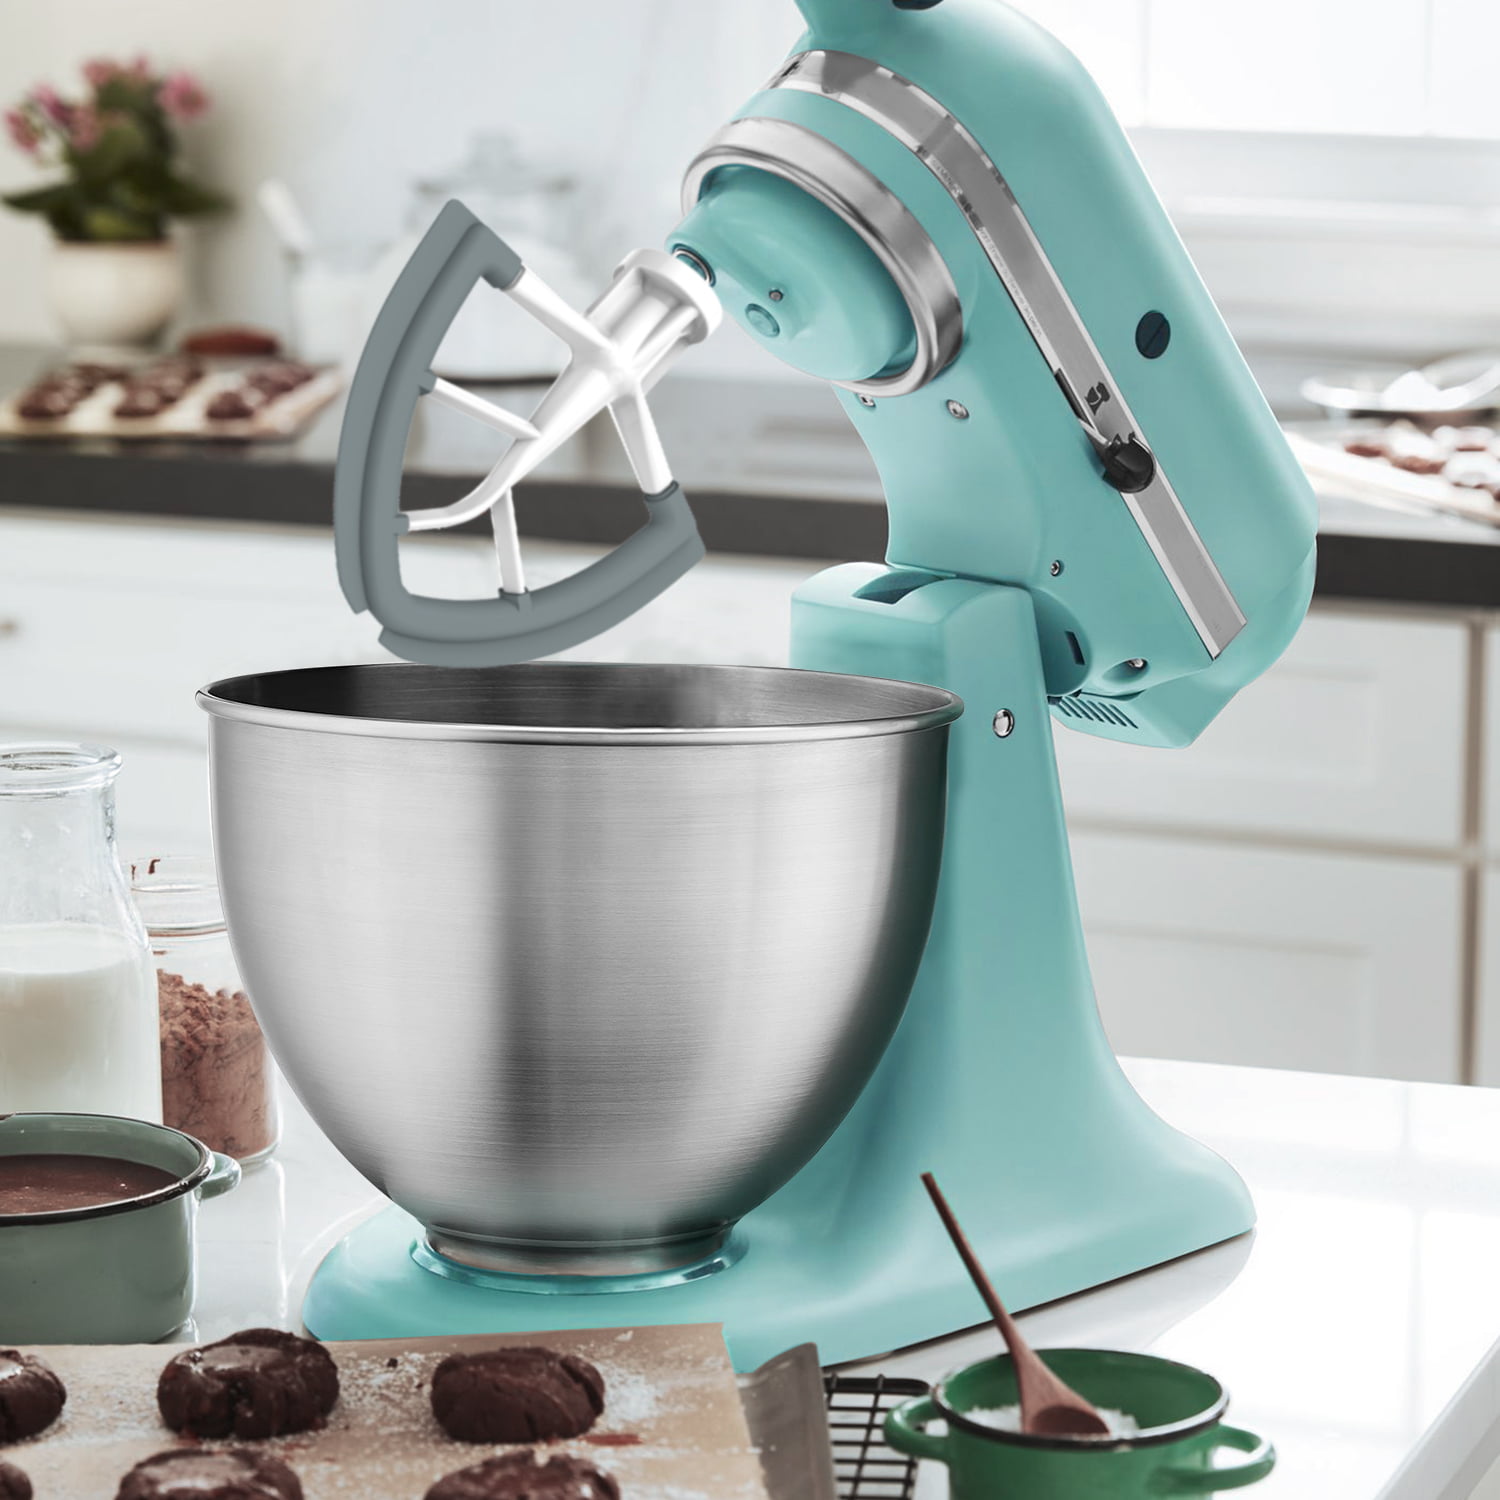 Tilt-Head Flat Beater Silicone Mixer Paddle Home Kitchen Mixing